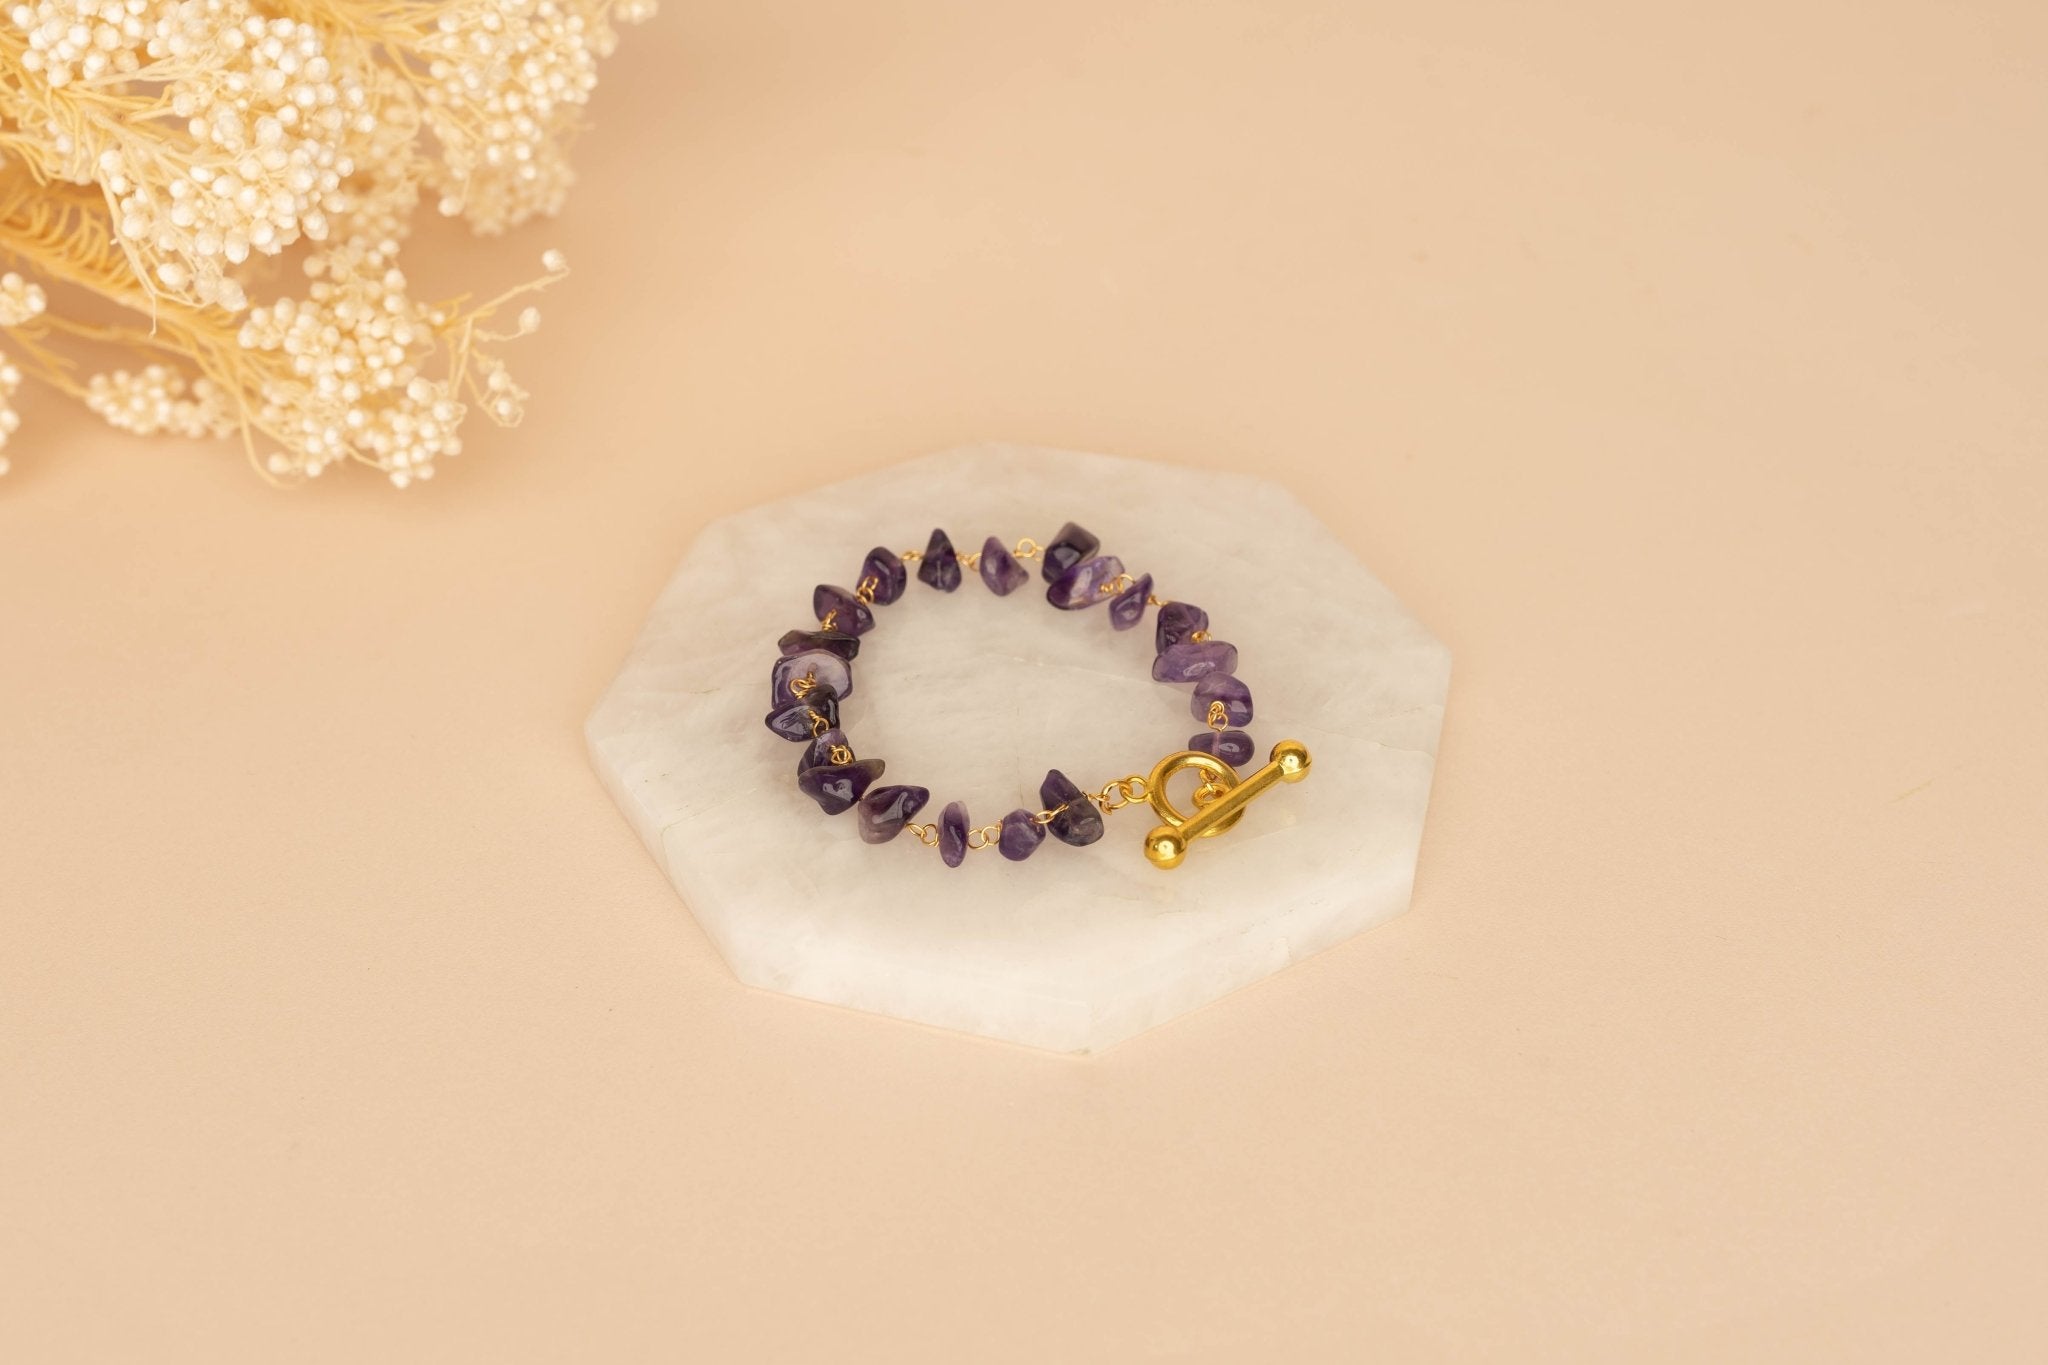 Amethyst Chipped Bracelet - Bodh Gem and Crystals